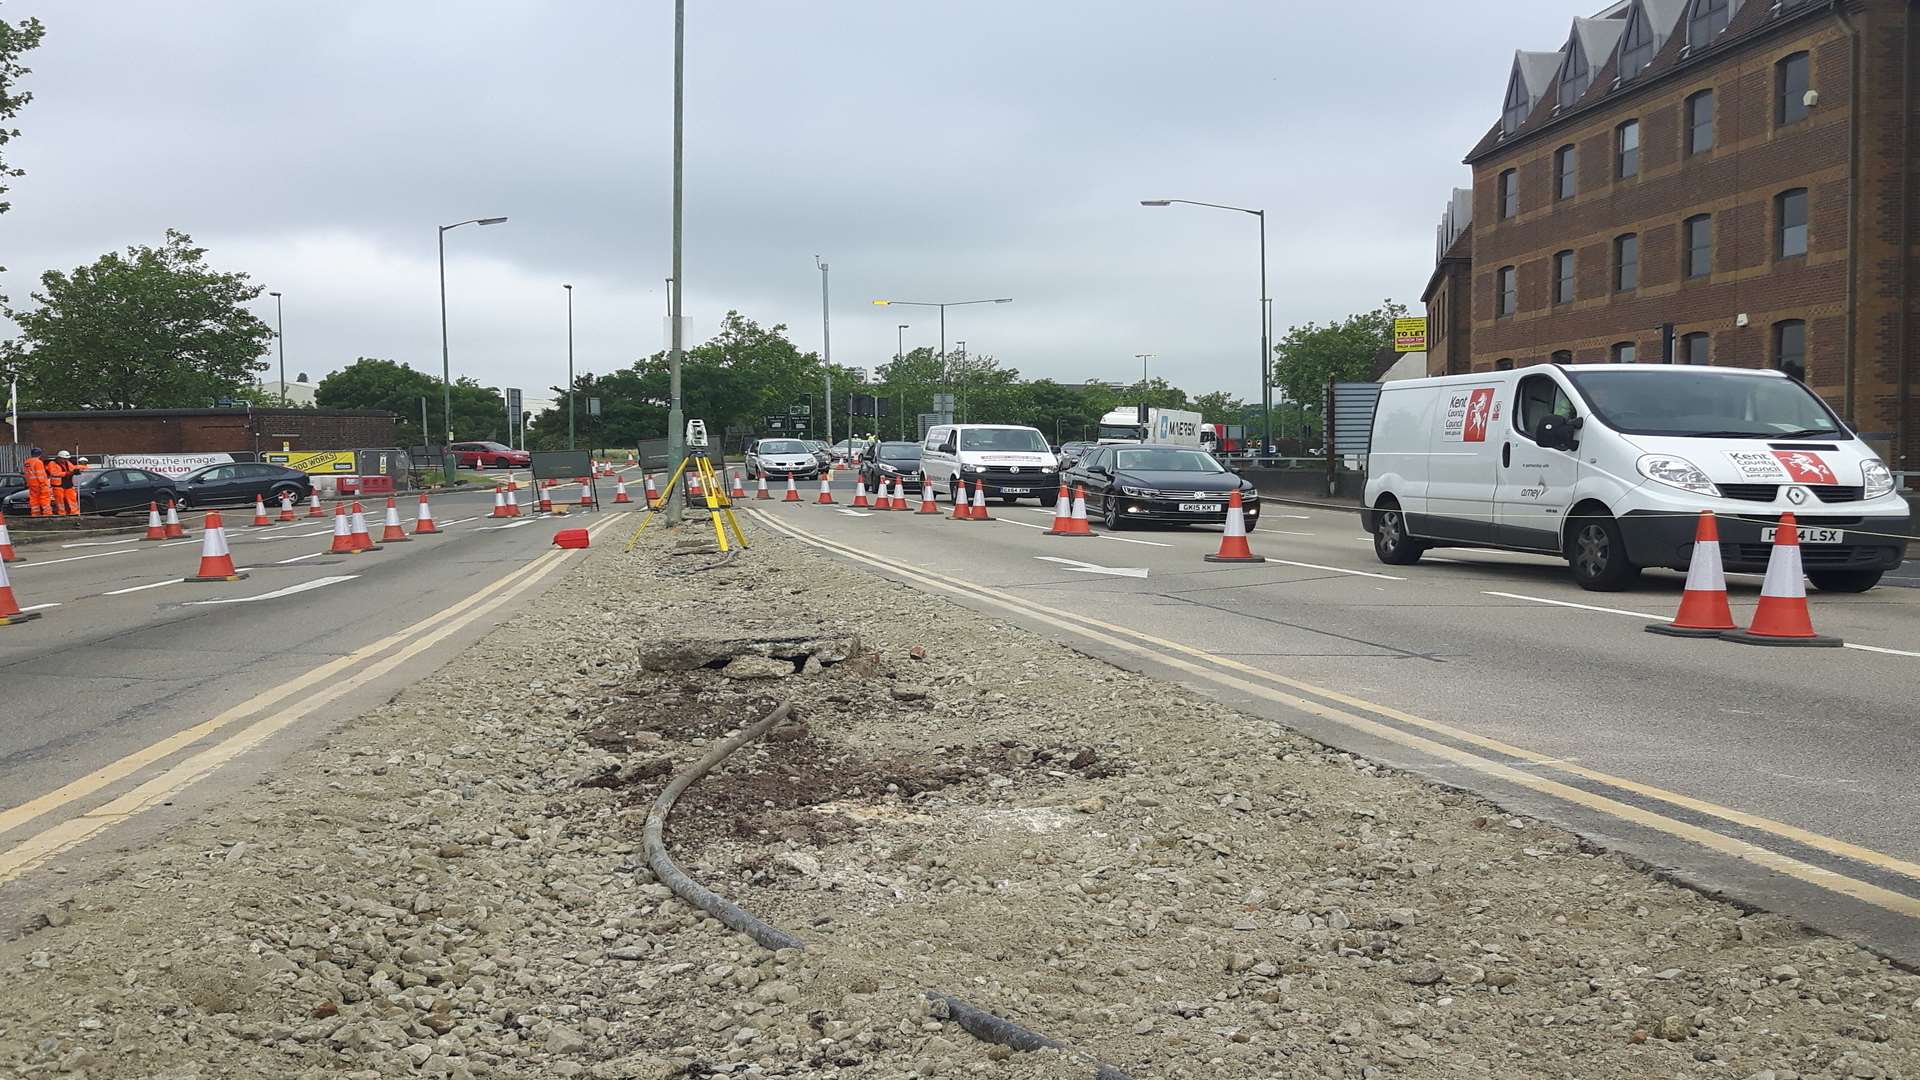 Traffic islands are being removed to make way for the widening of Fairmeadow